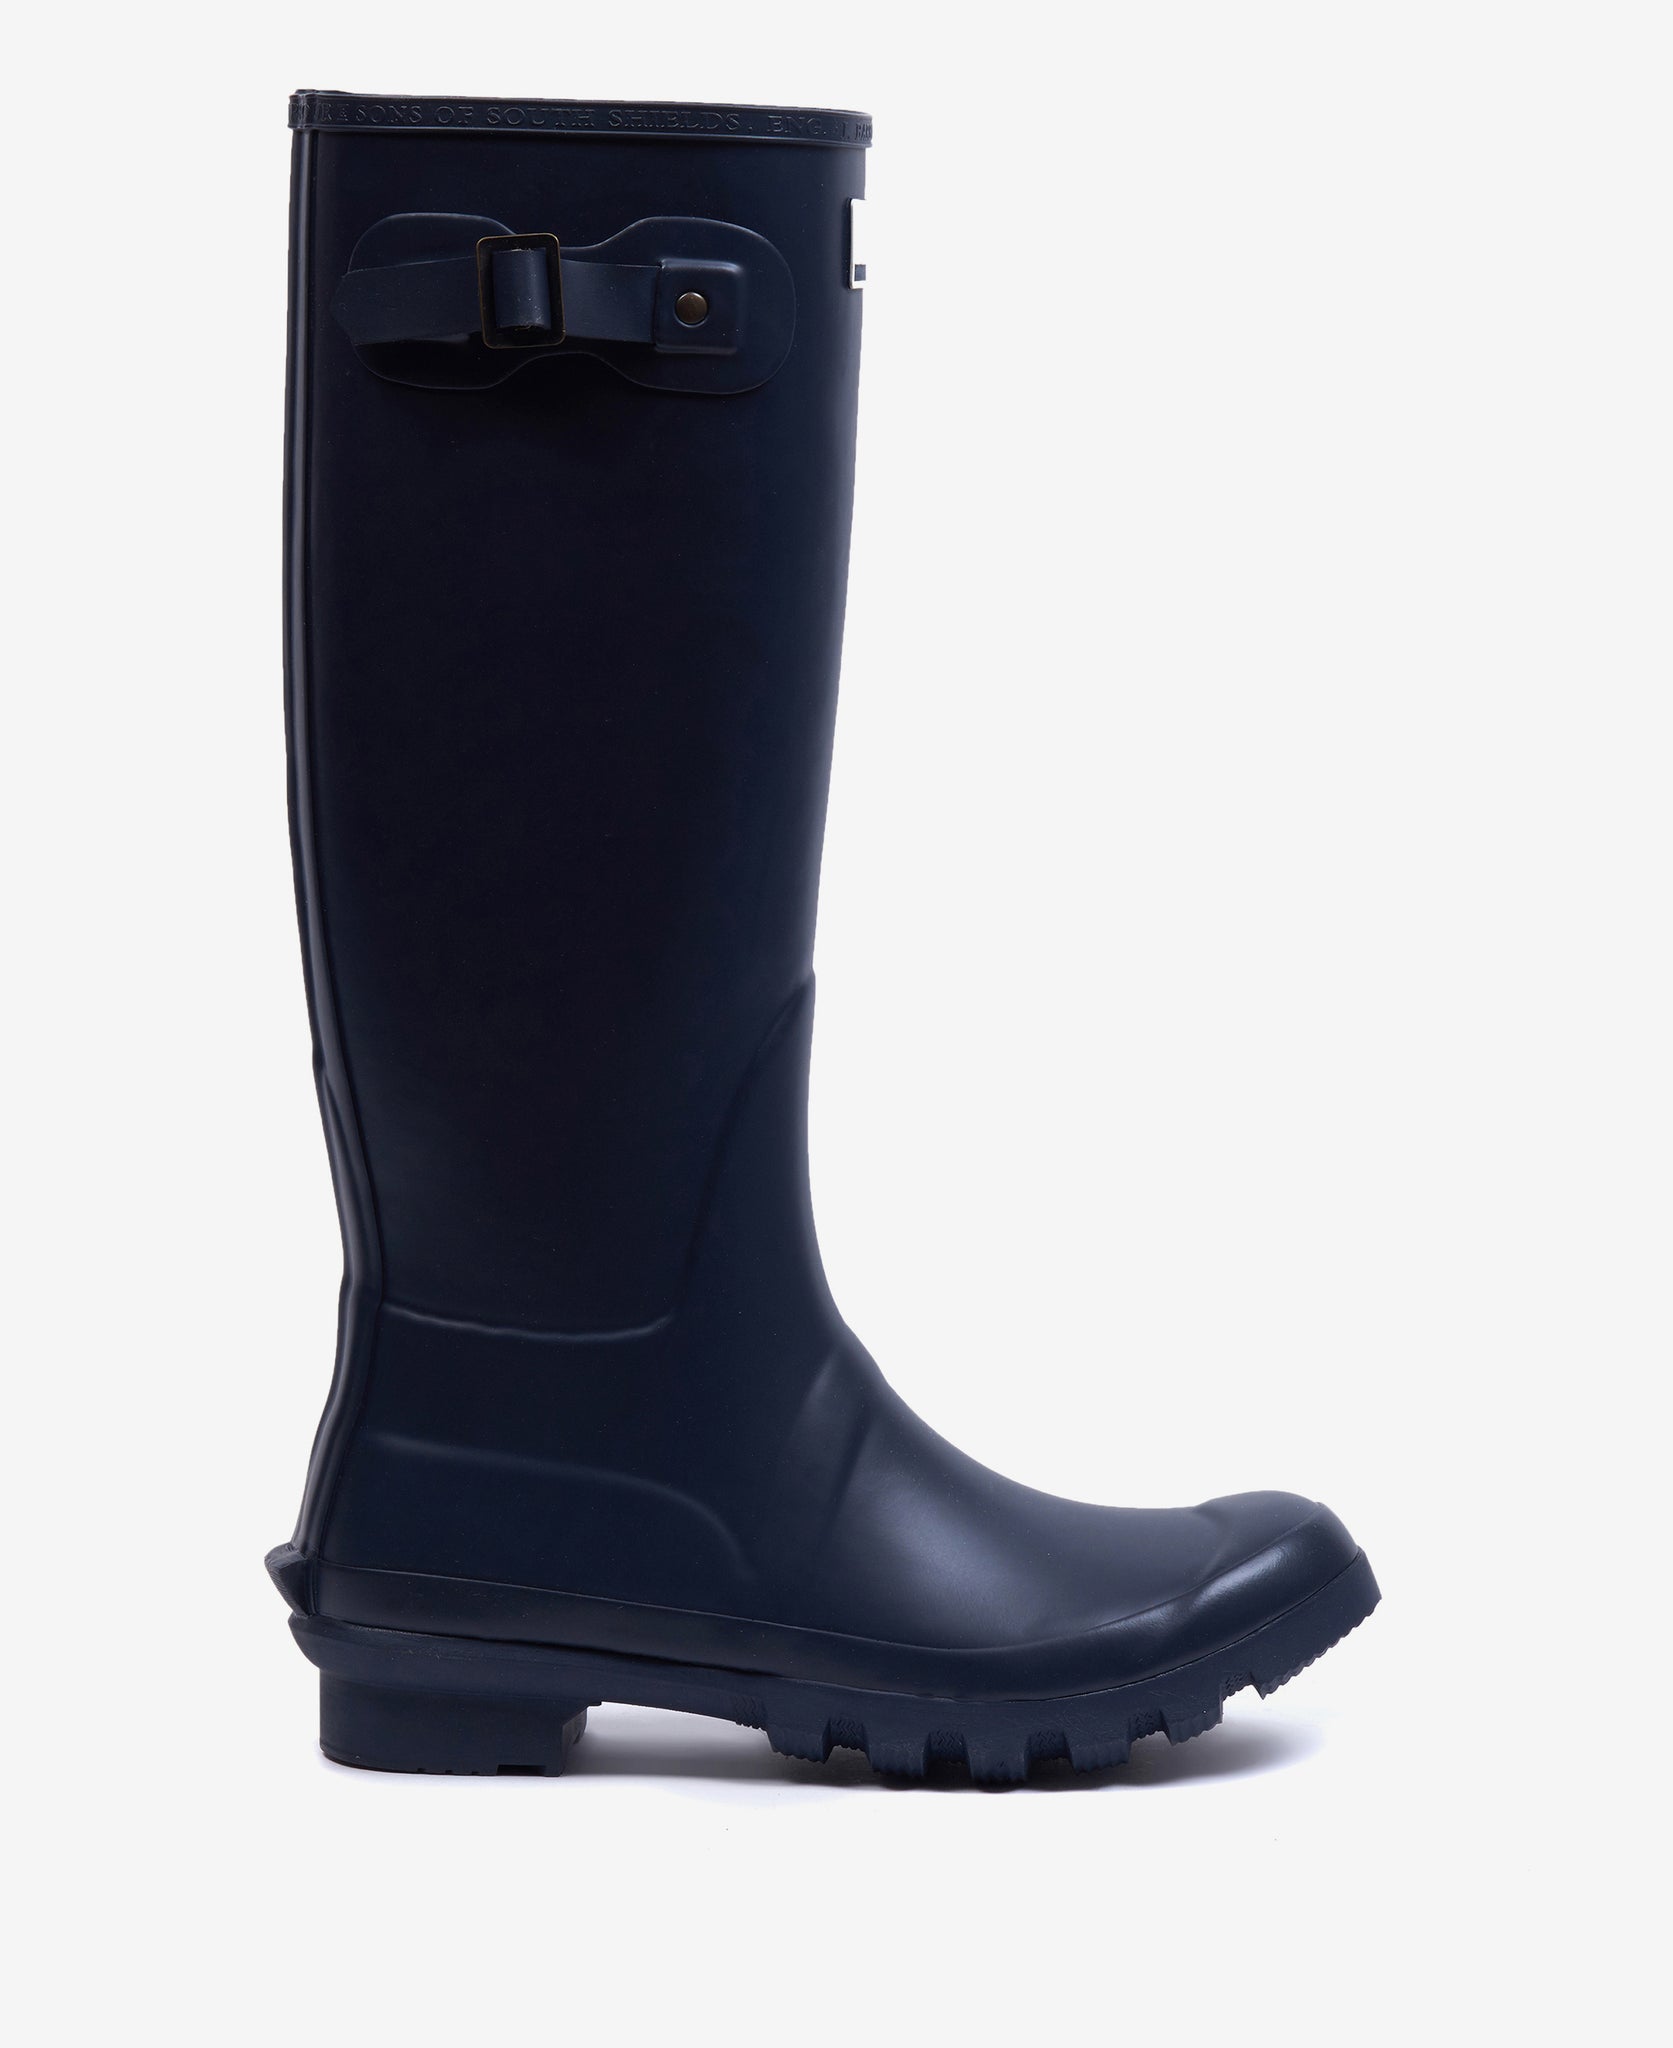 Barbour Bede Wellington Boots | Barbour Wellies – Sam Turner & Sons